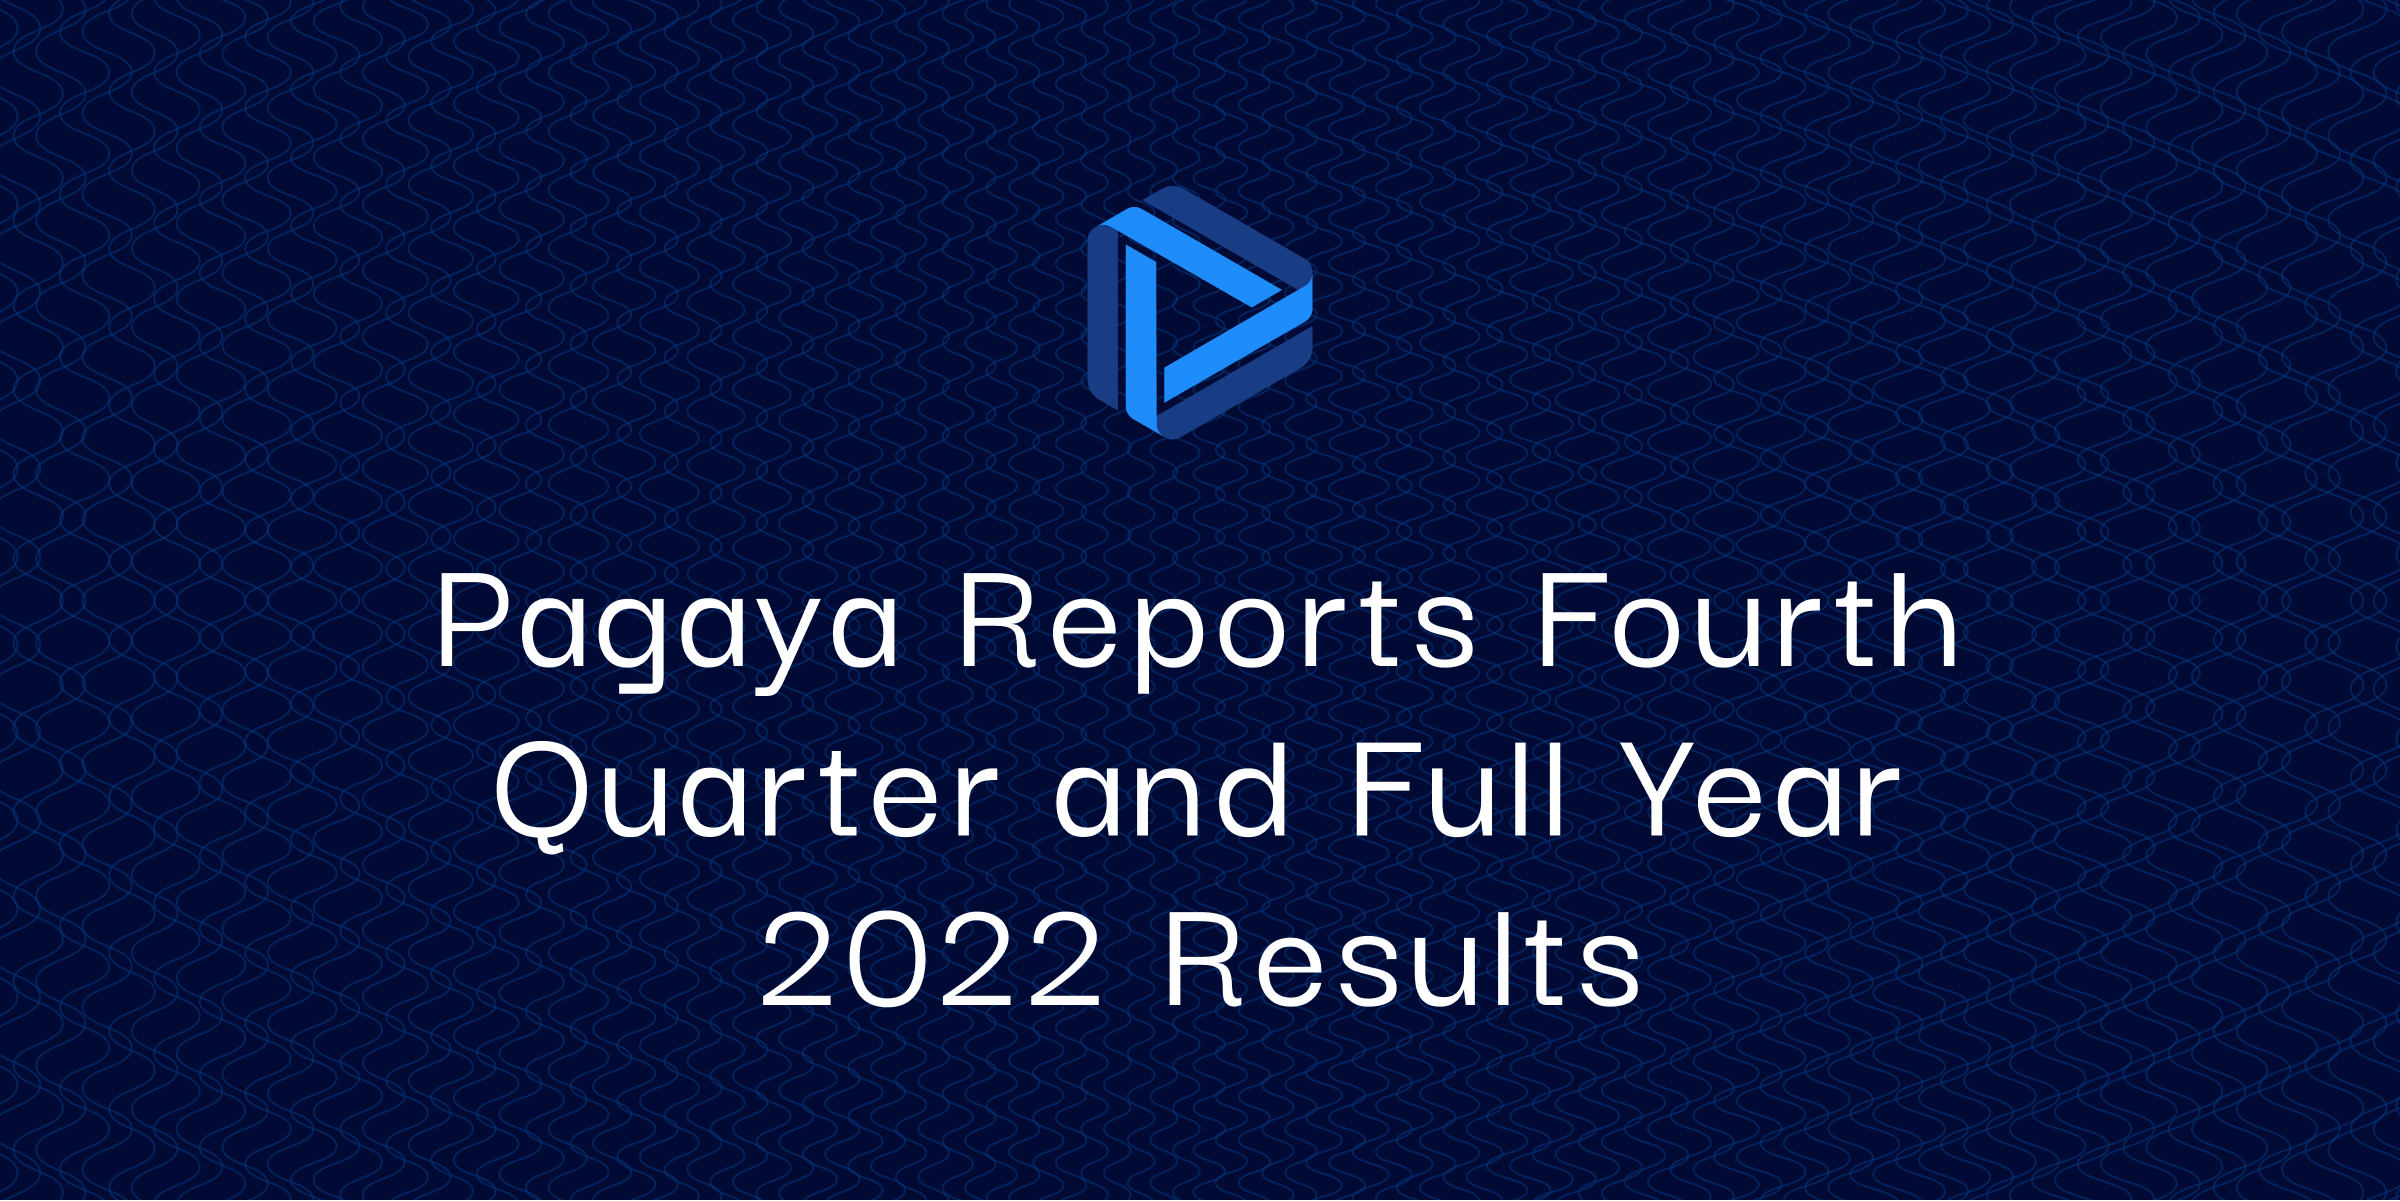 Pagaya Reports Fourth Quarter and Full Year 2022 Results text on a blue background with the Pagaya icon